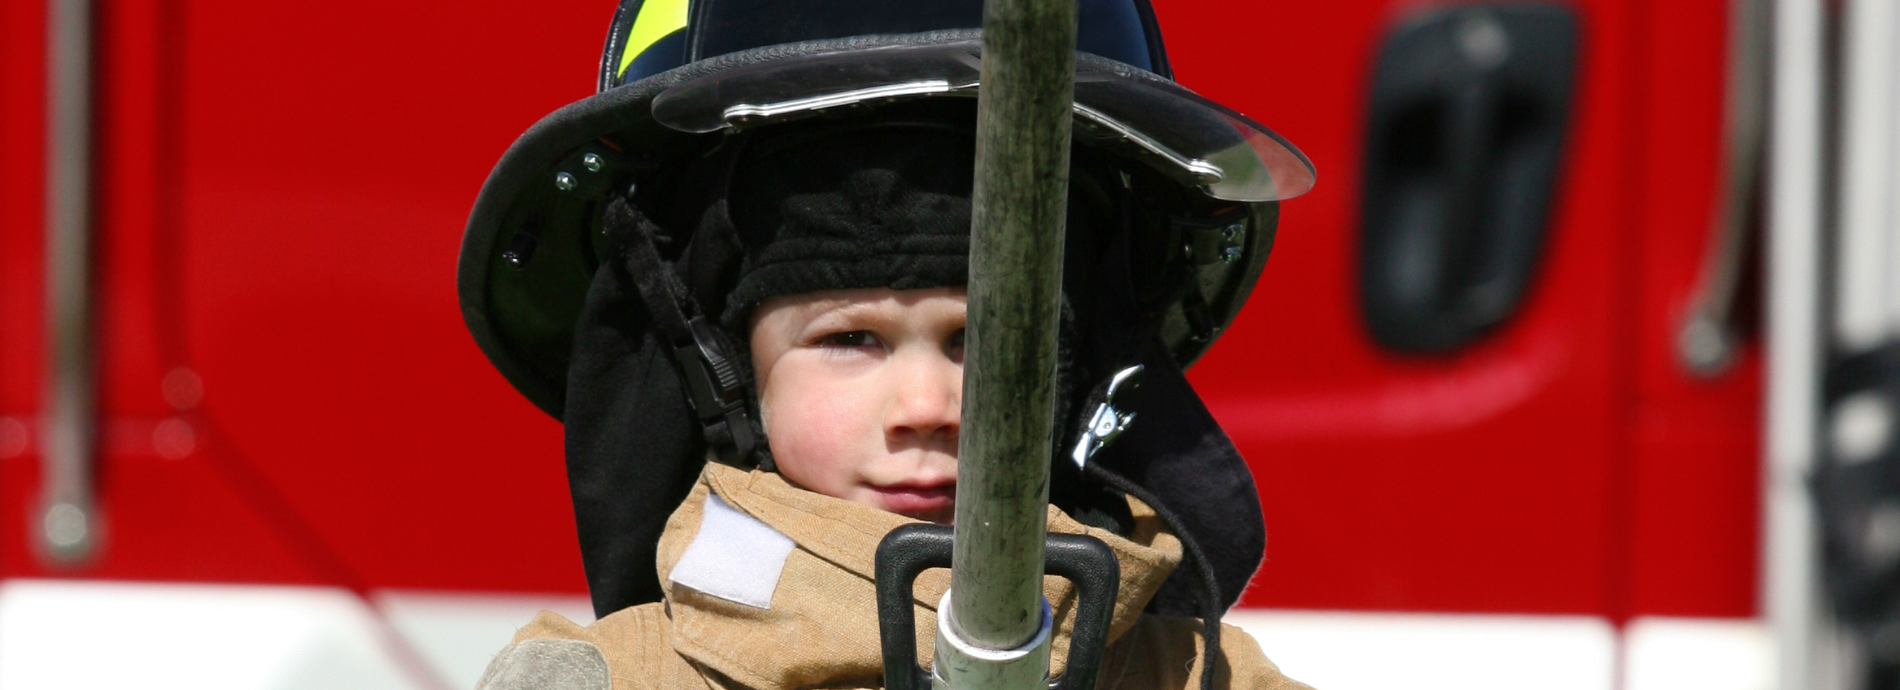 Child in firefighter gear standing in front of a fire truck